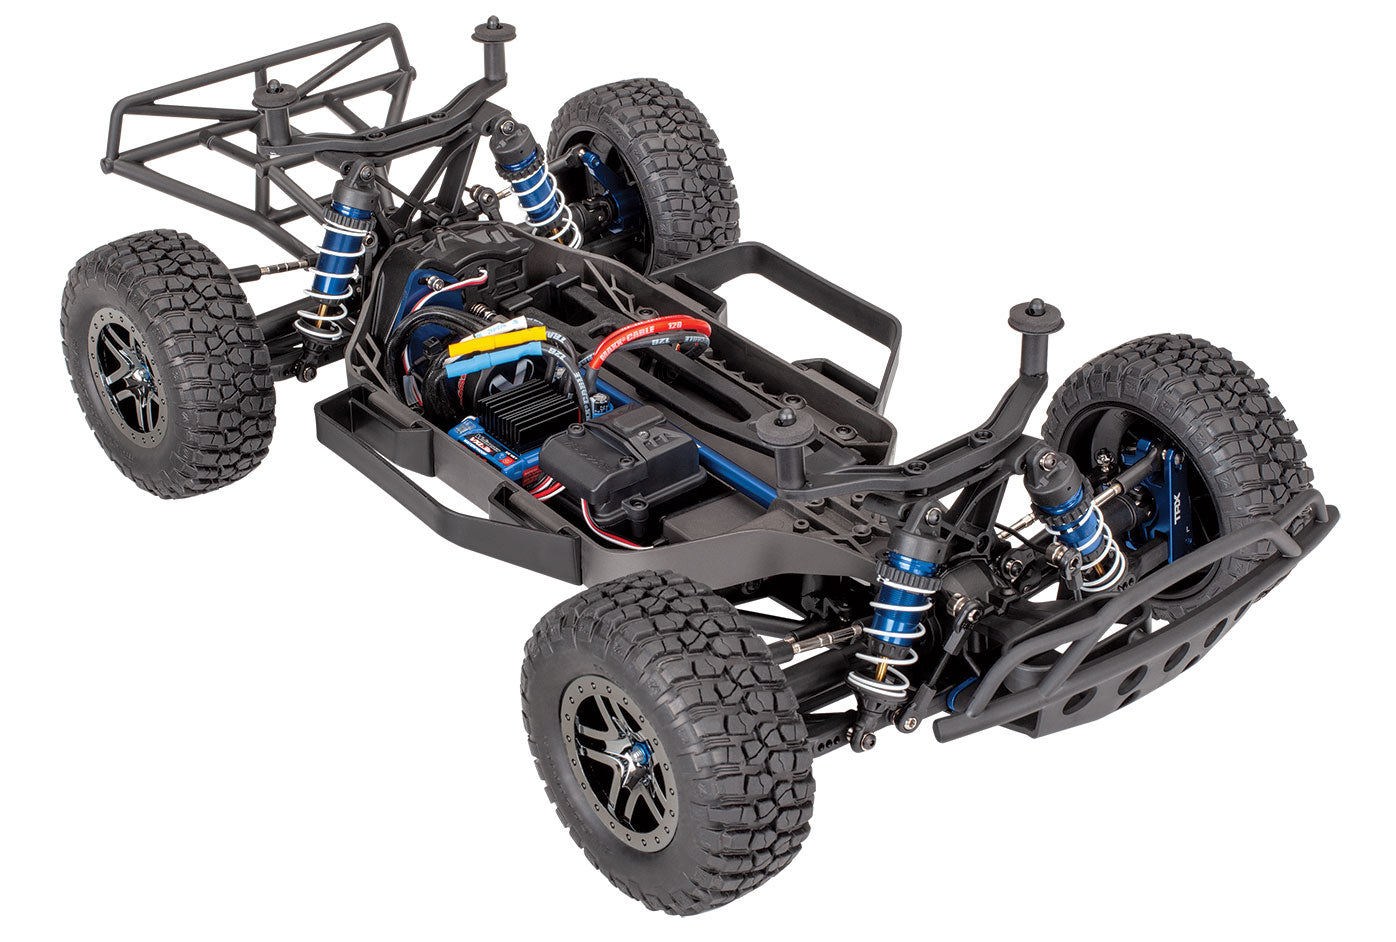 Traxxas Slash 4X4 Ultimate 4Wd Short Course Truck, Green, No Battery Or Charger